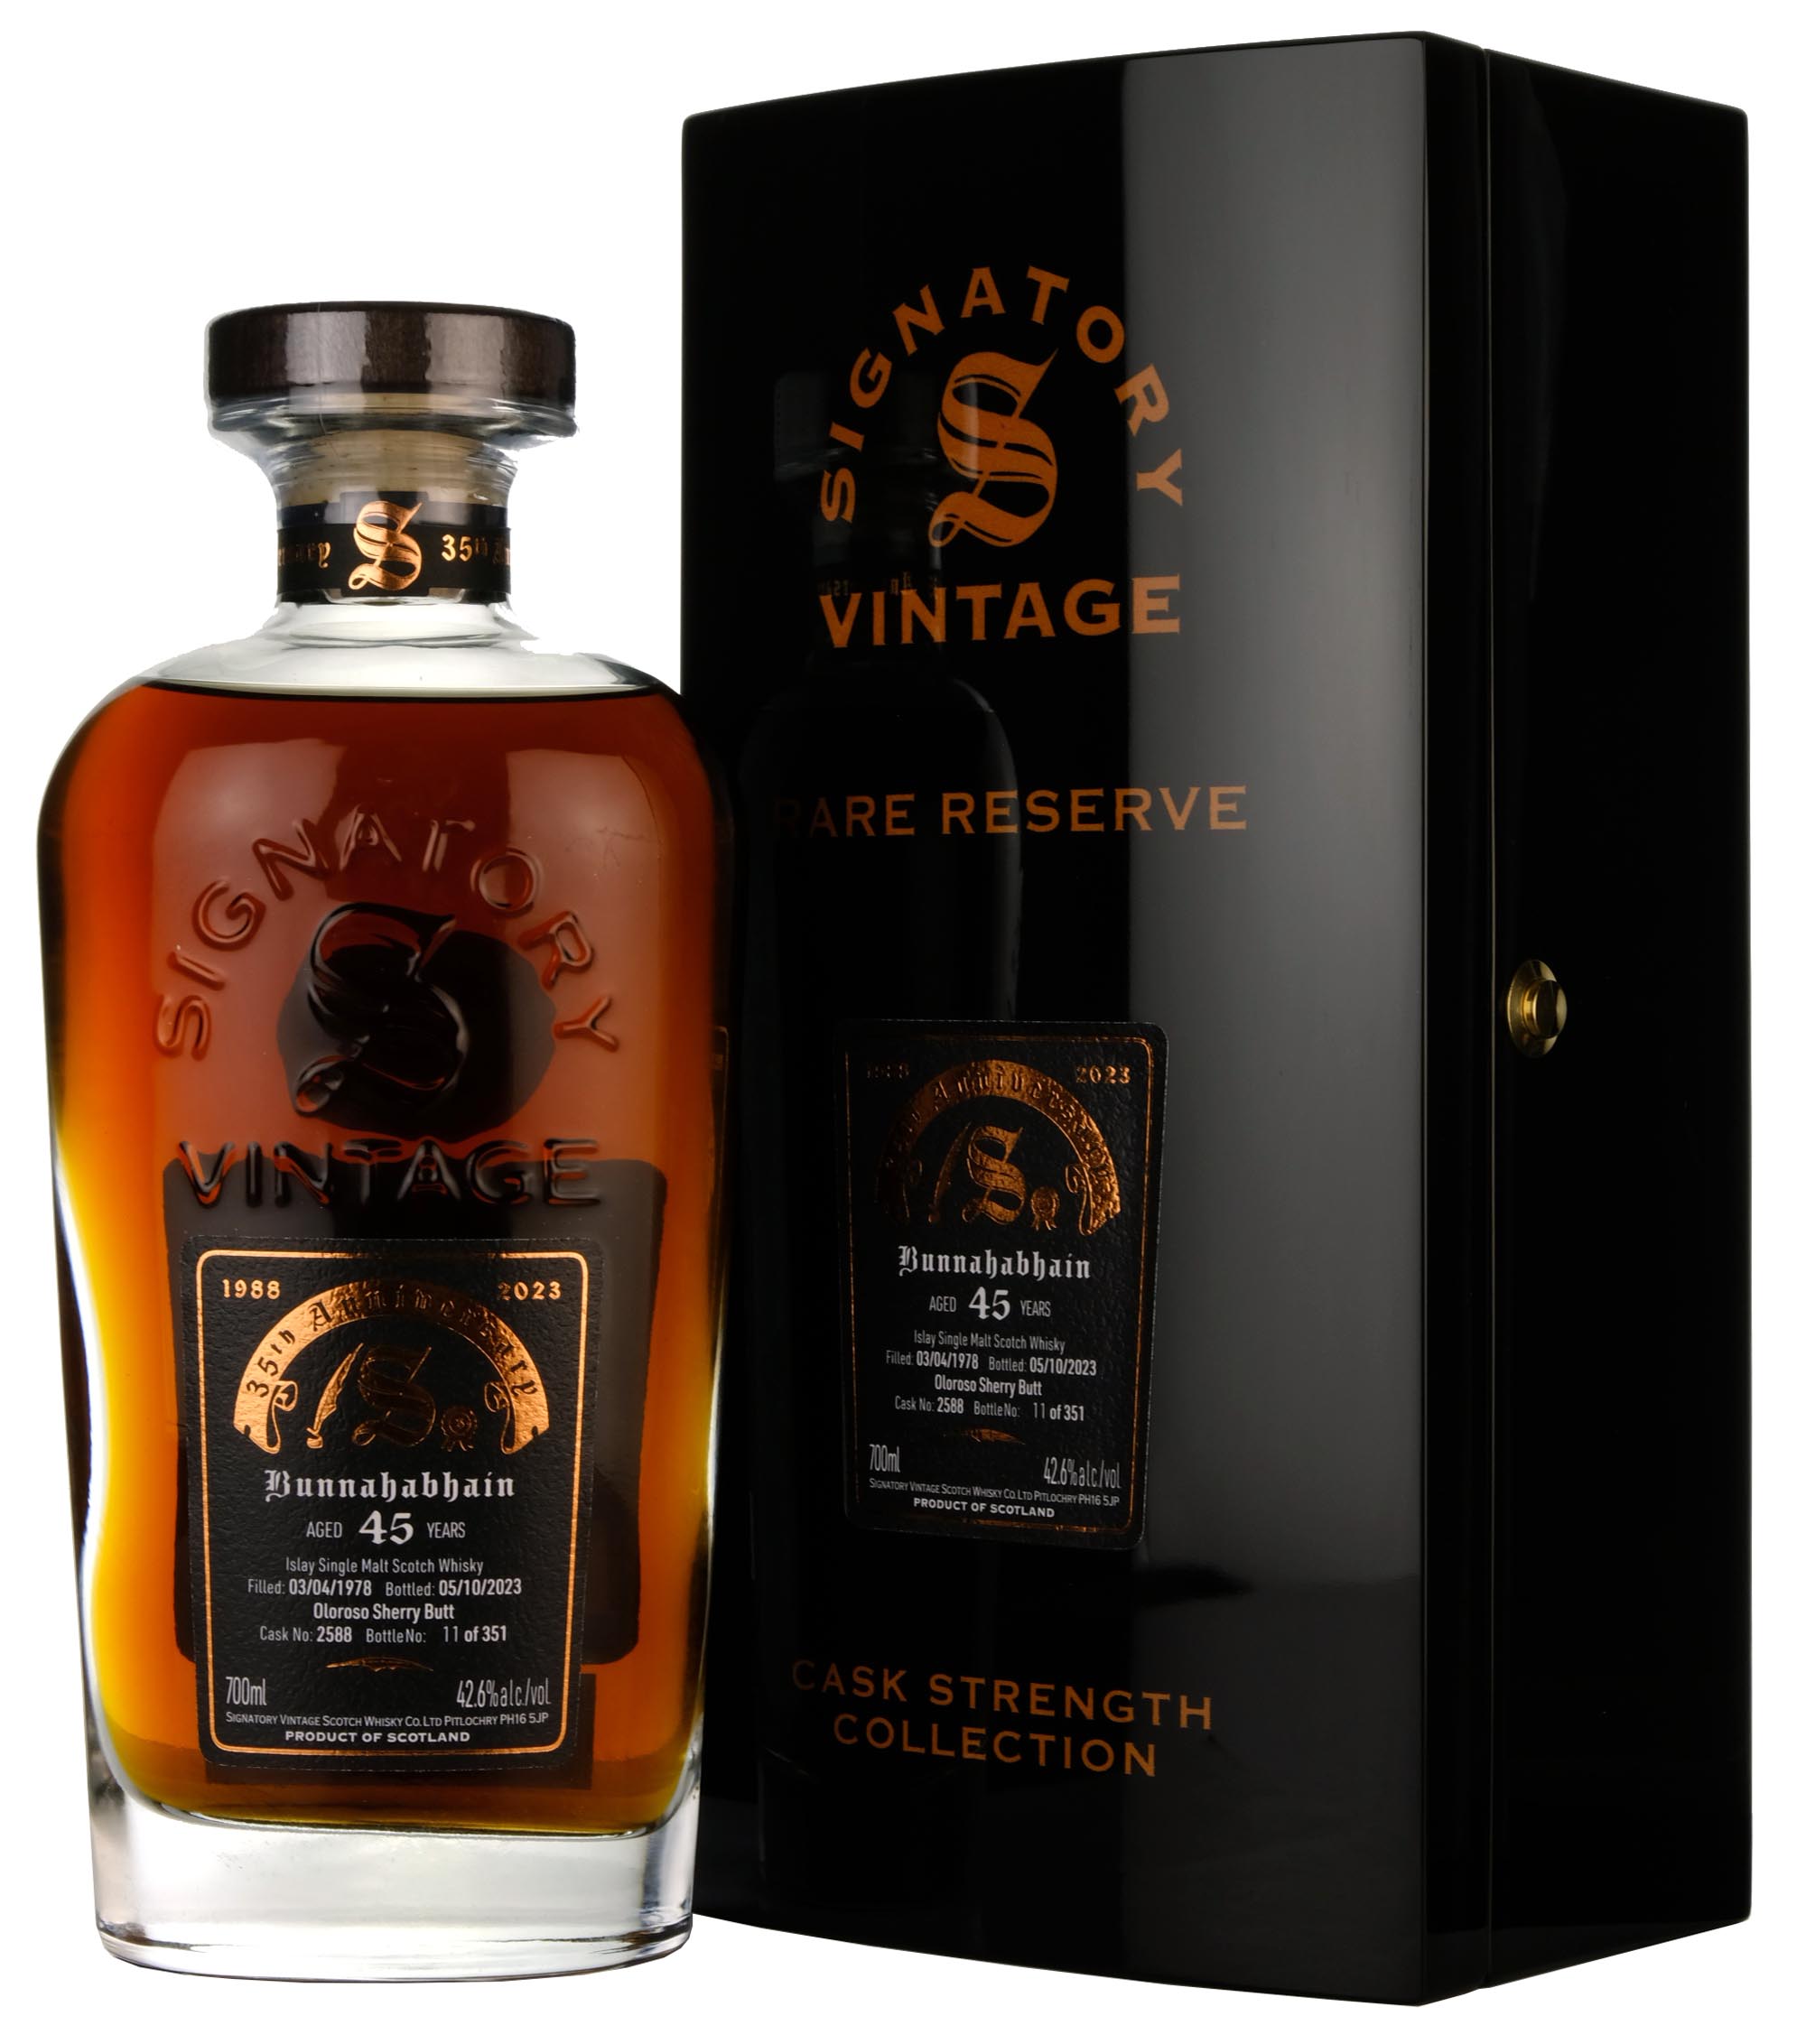 Highland Park 37 Years Old 1973 - Exclusive to Travel Retail - Just Whisky  Auctions